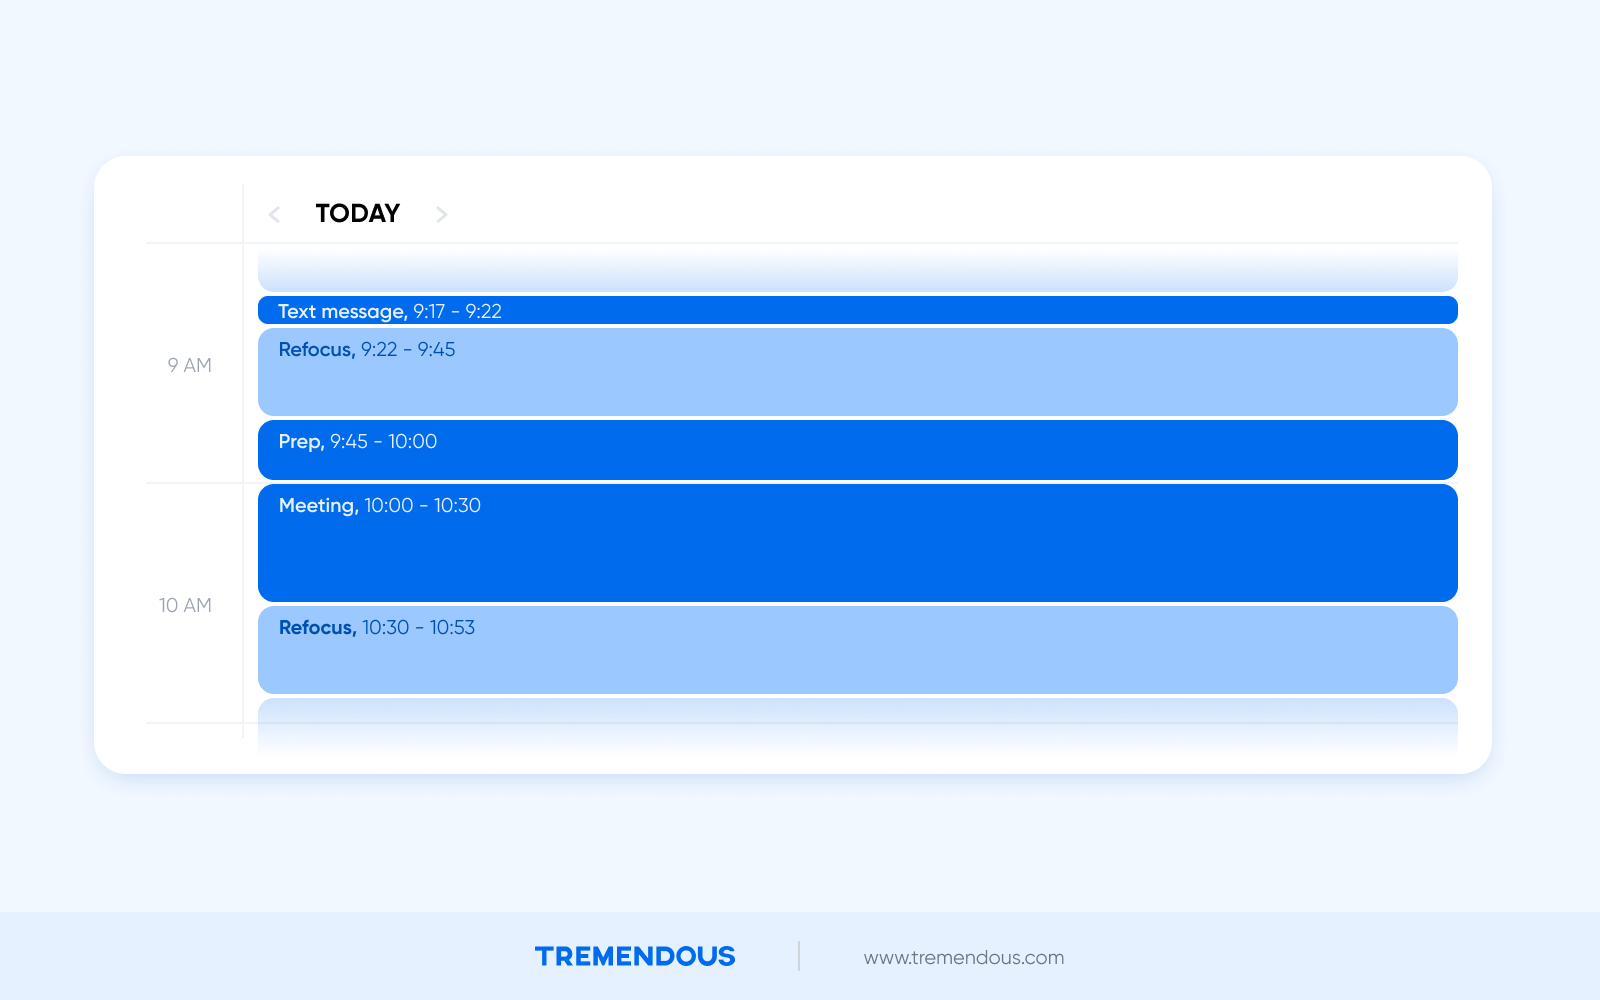 A Google calendar that shows a person spending 5 minutes to send a text message, then 23 minutes to refocus on their original task after sending the text. They then spend 15 minutes prepping for a meeting, a half hour in the meeting, and 23 minutes refocusing on their original task after the meeting